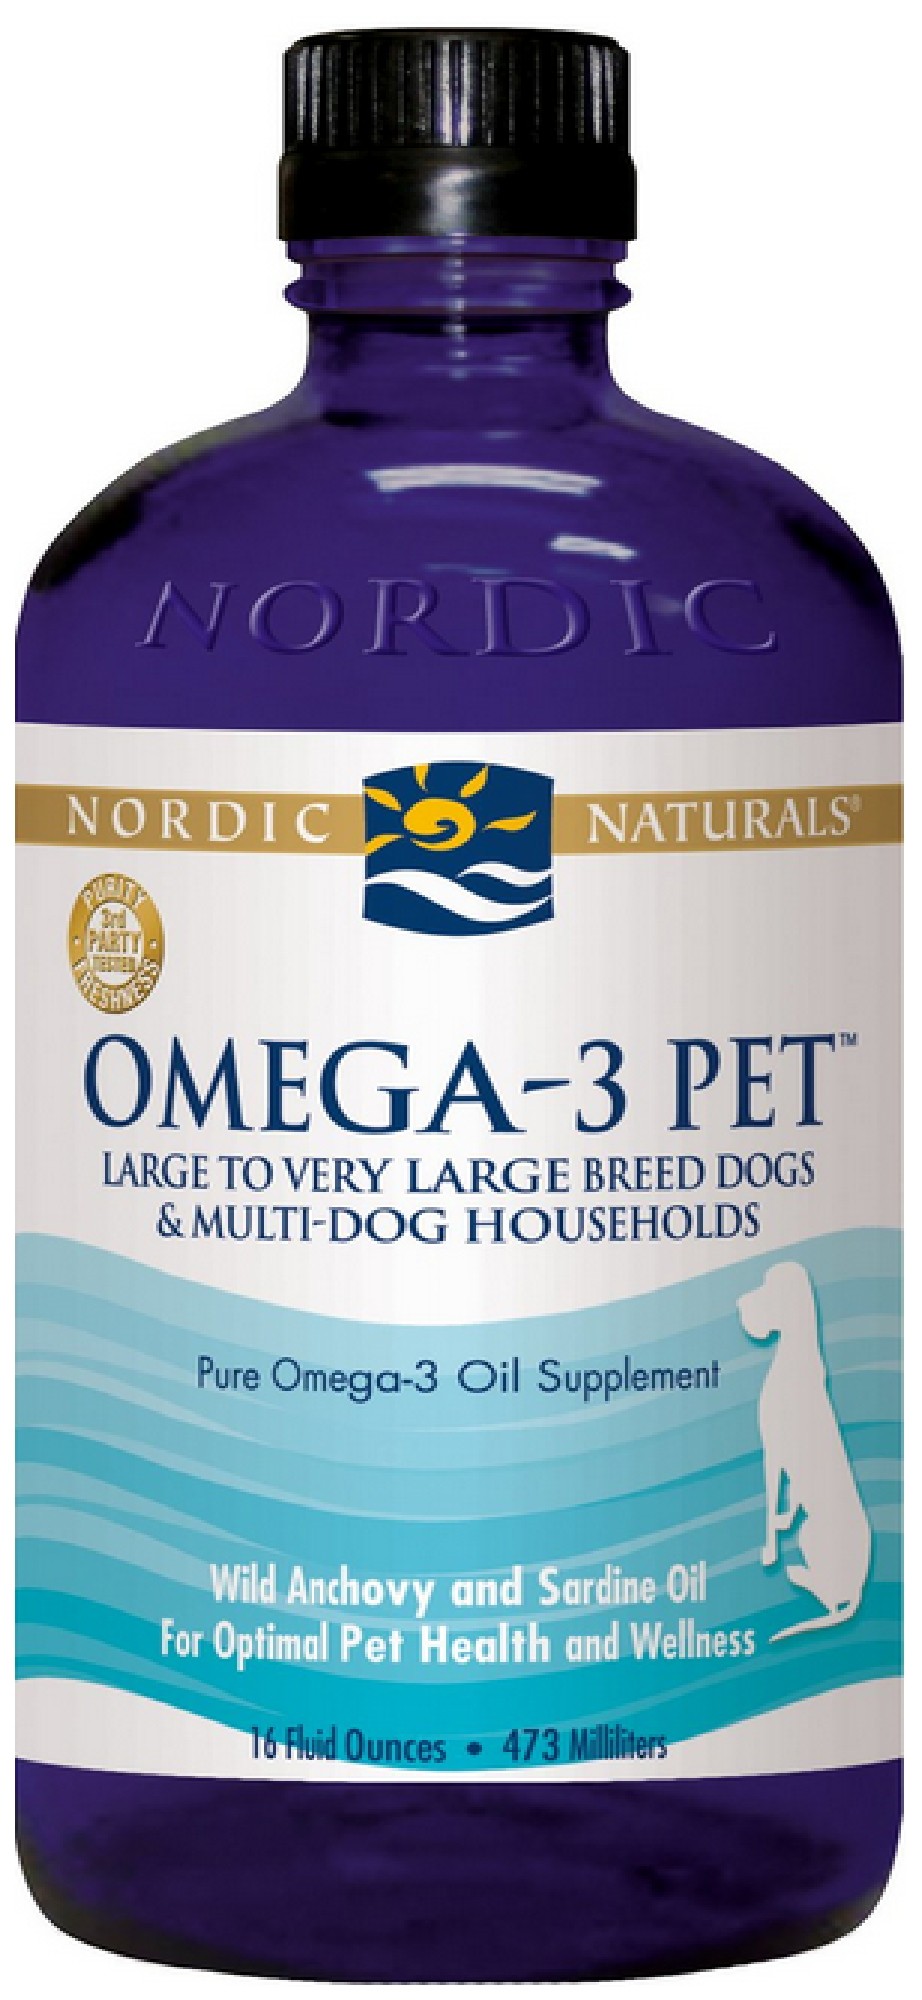 Omega-3 Pet for Large to Very Large Breed Dogs &amp; Multi-Dog Households